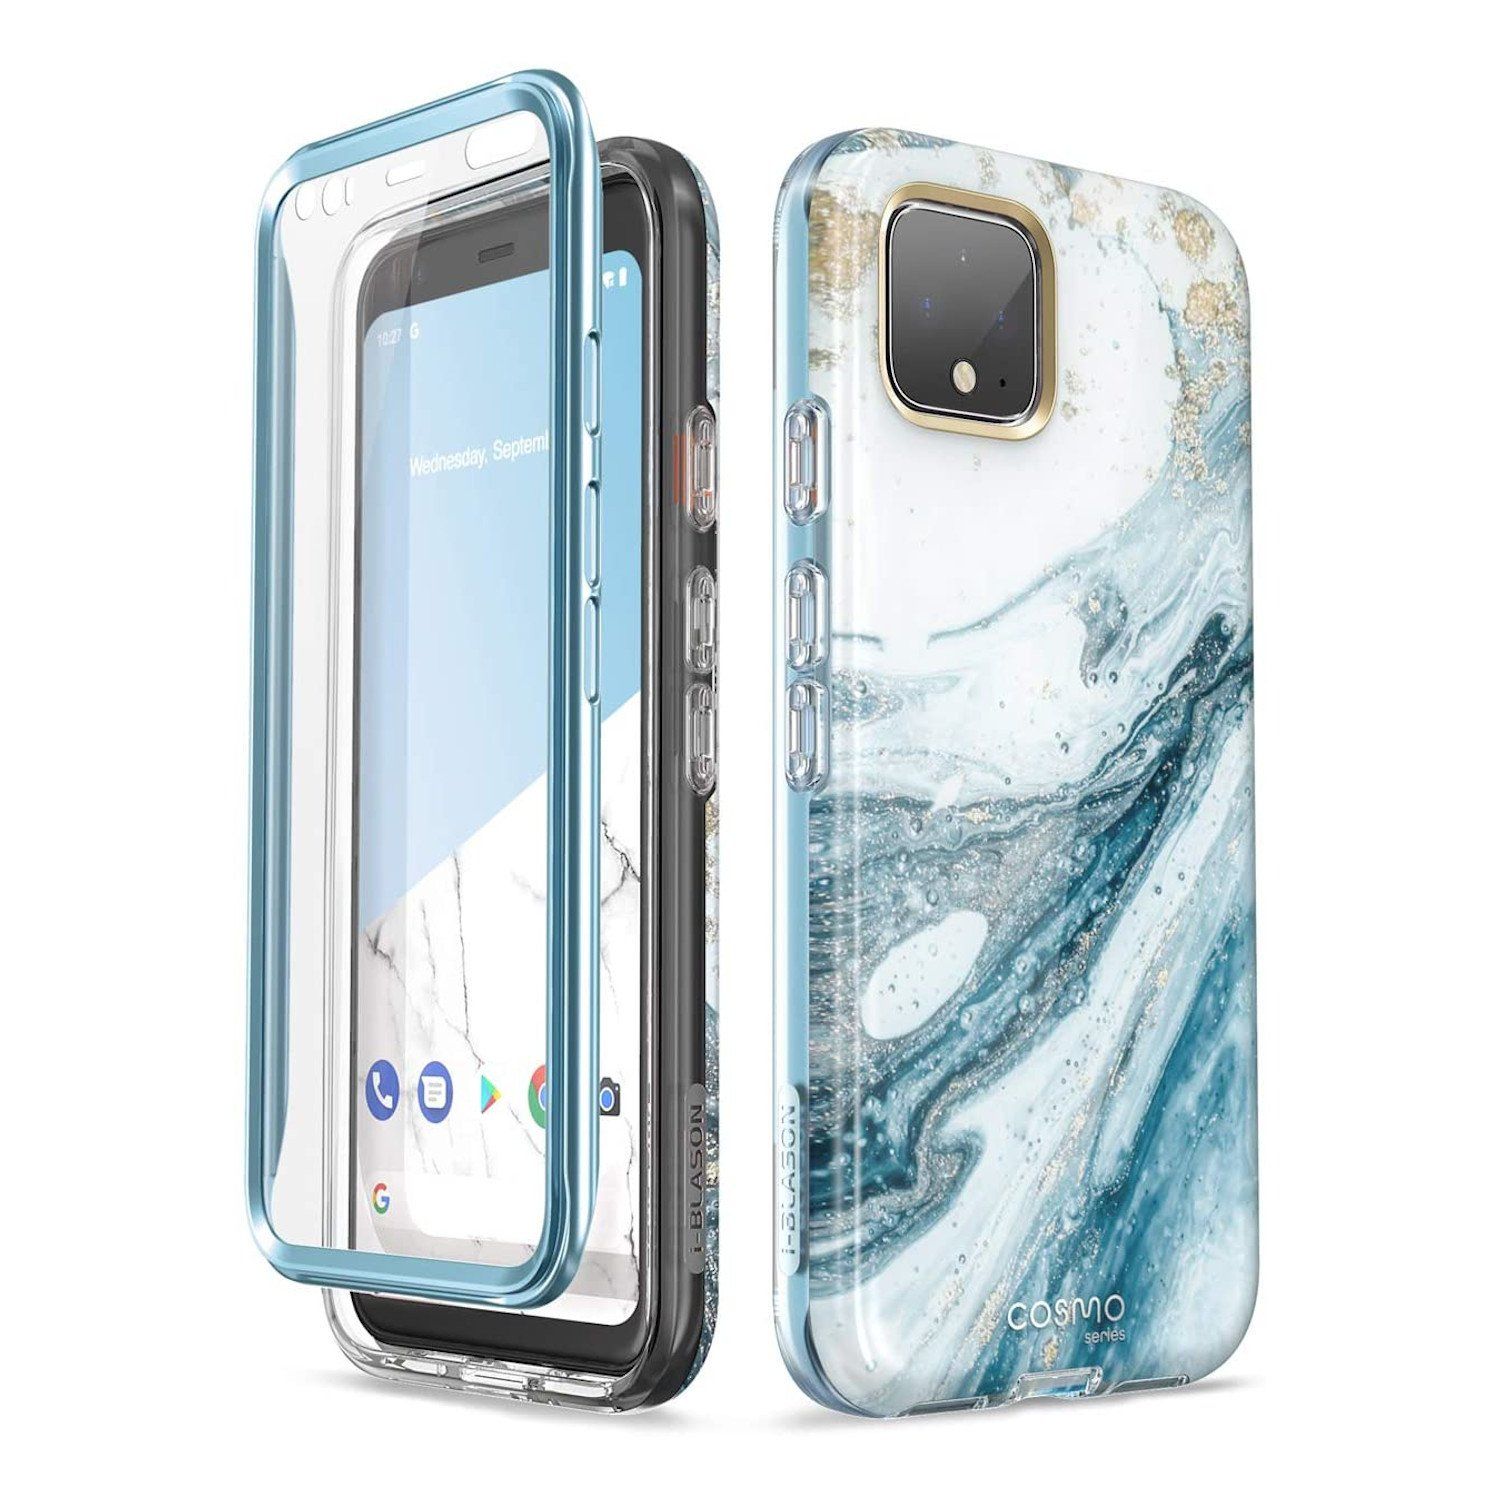 i-Blason Cosmo Series Case for Google Pixel 4 XL(With Build-in Screen Protector), Blue Google Case i-Blason Blue 